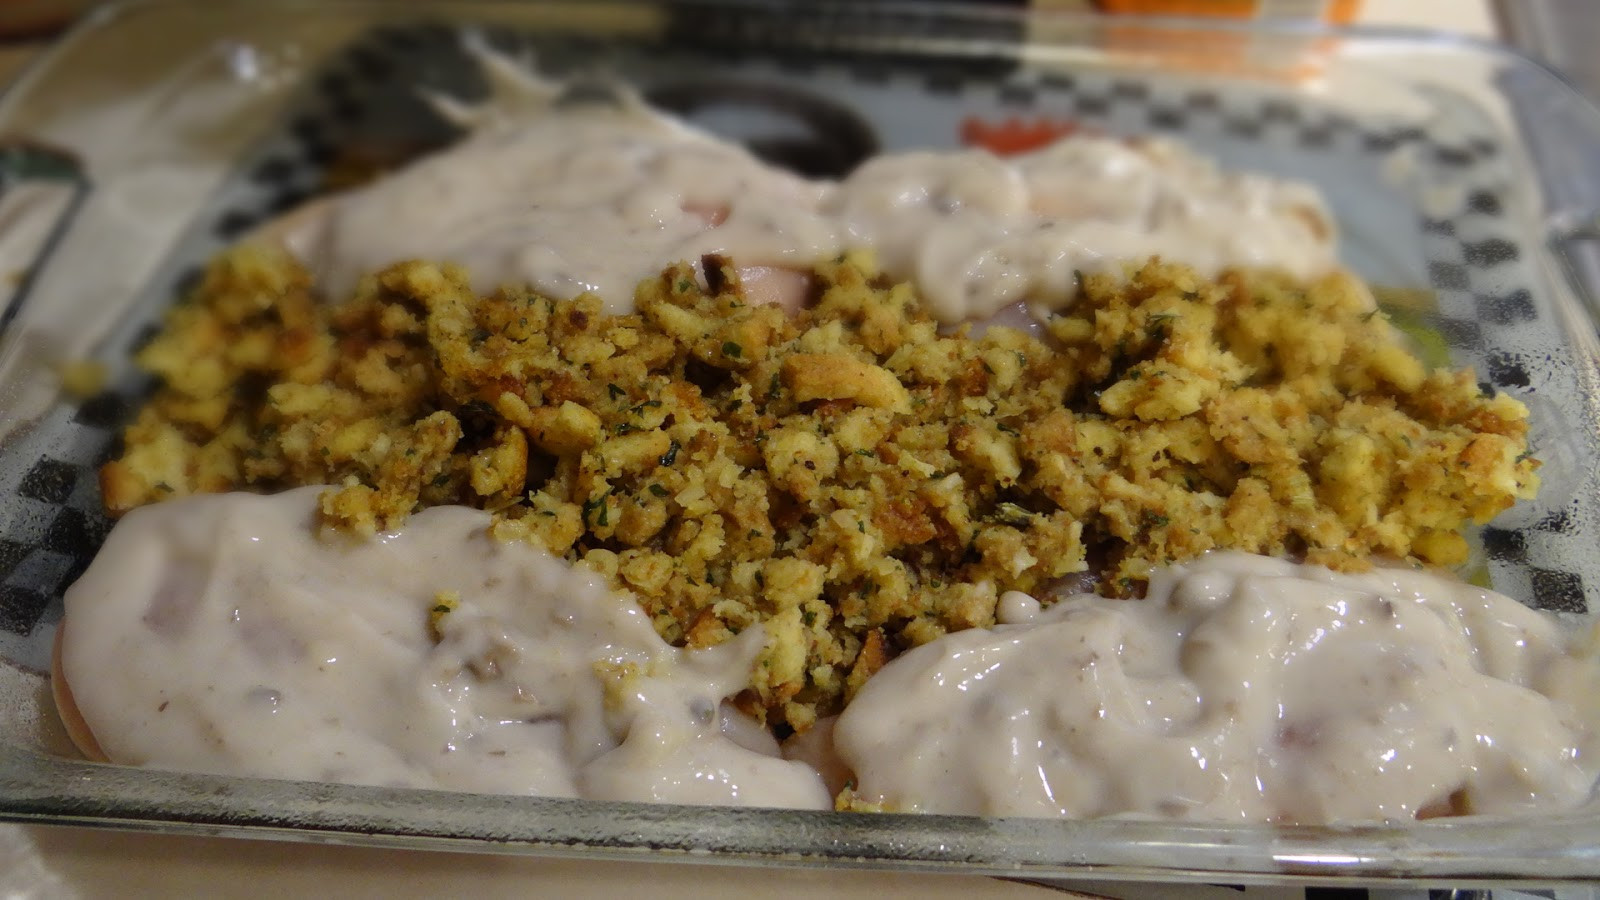 Baking Chicken Breast With Cream Of Mushroom Soup
 The Blooming Daisy Day 13 Skinny Chicken Stuffing Bake